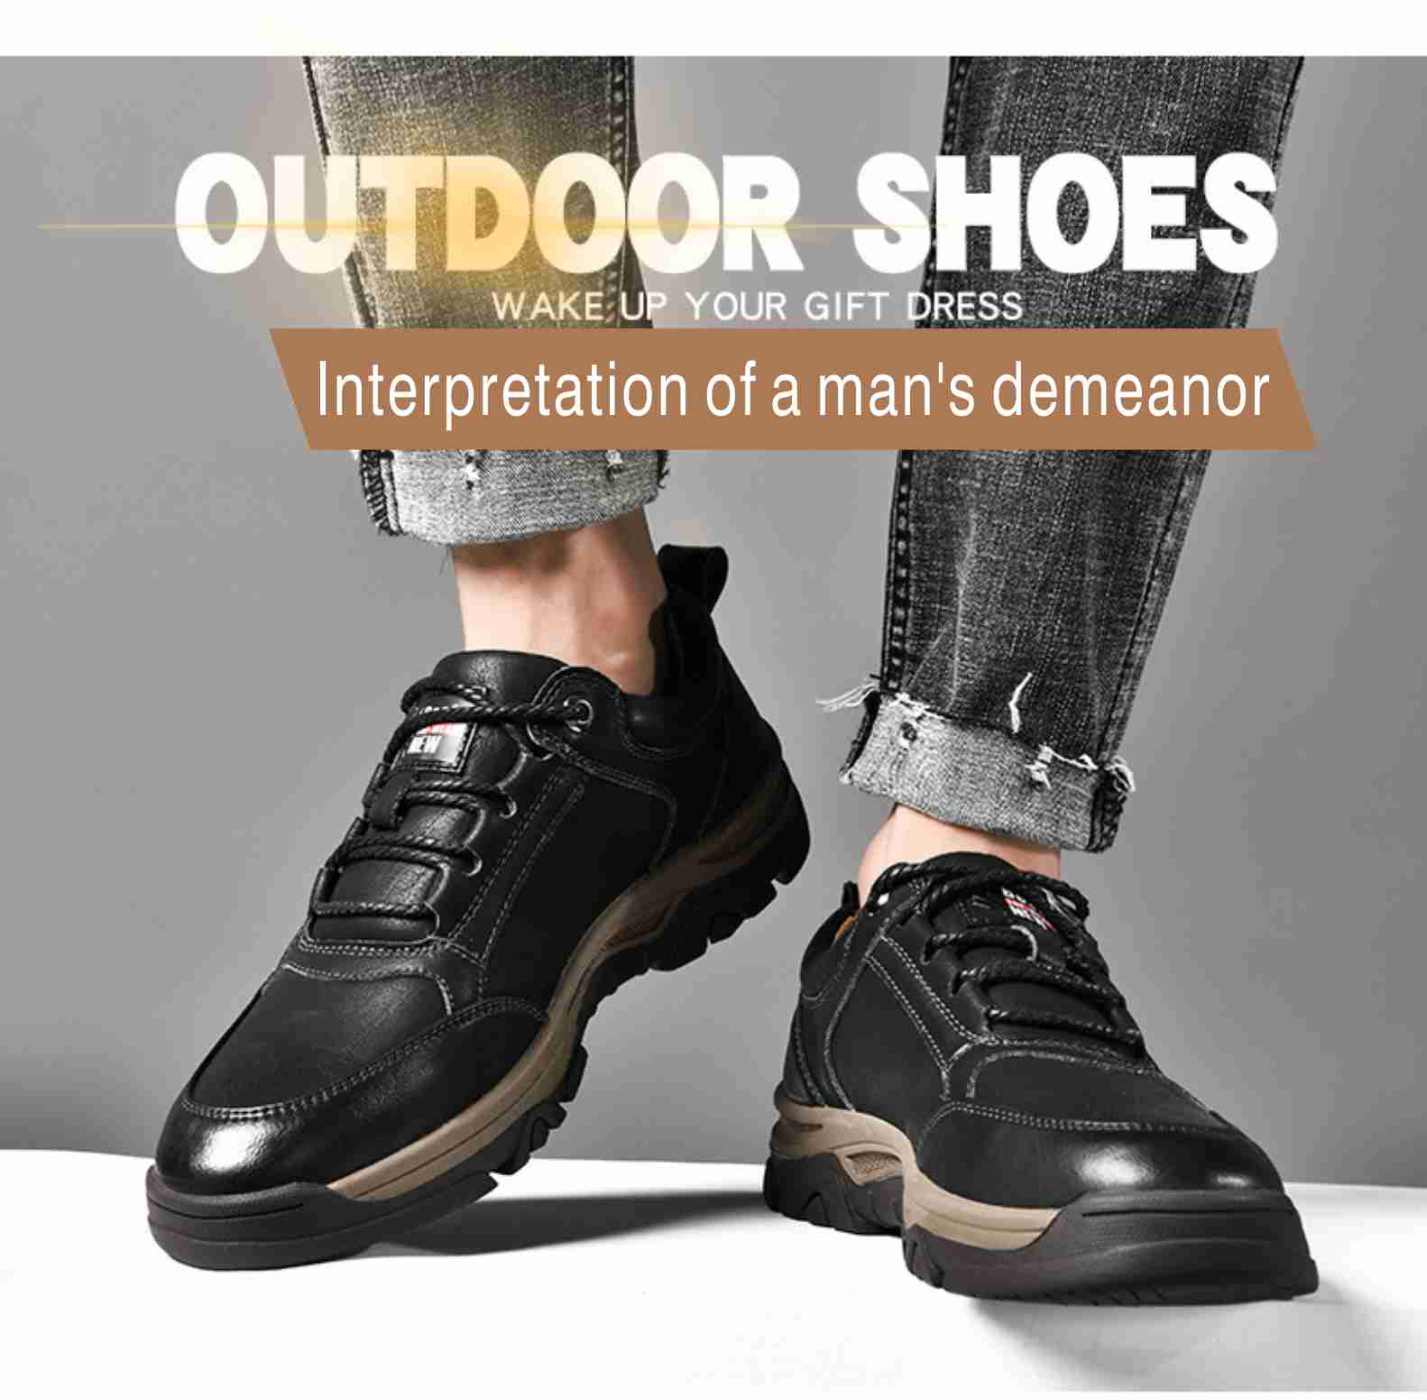 New men's casual business leather shoes, men's shoes, men's outdoor sports hiking shoes, men's sports shoes,